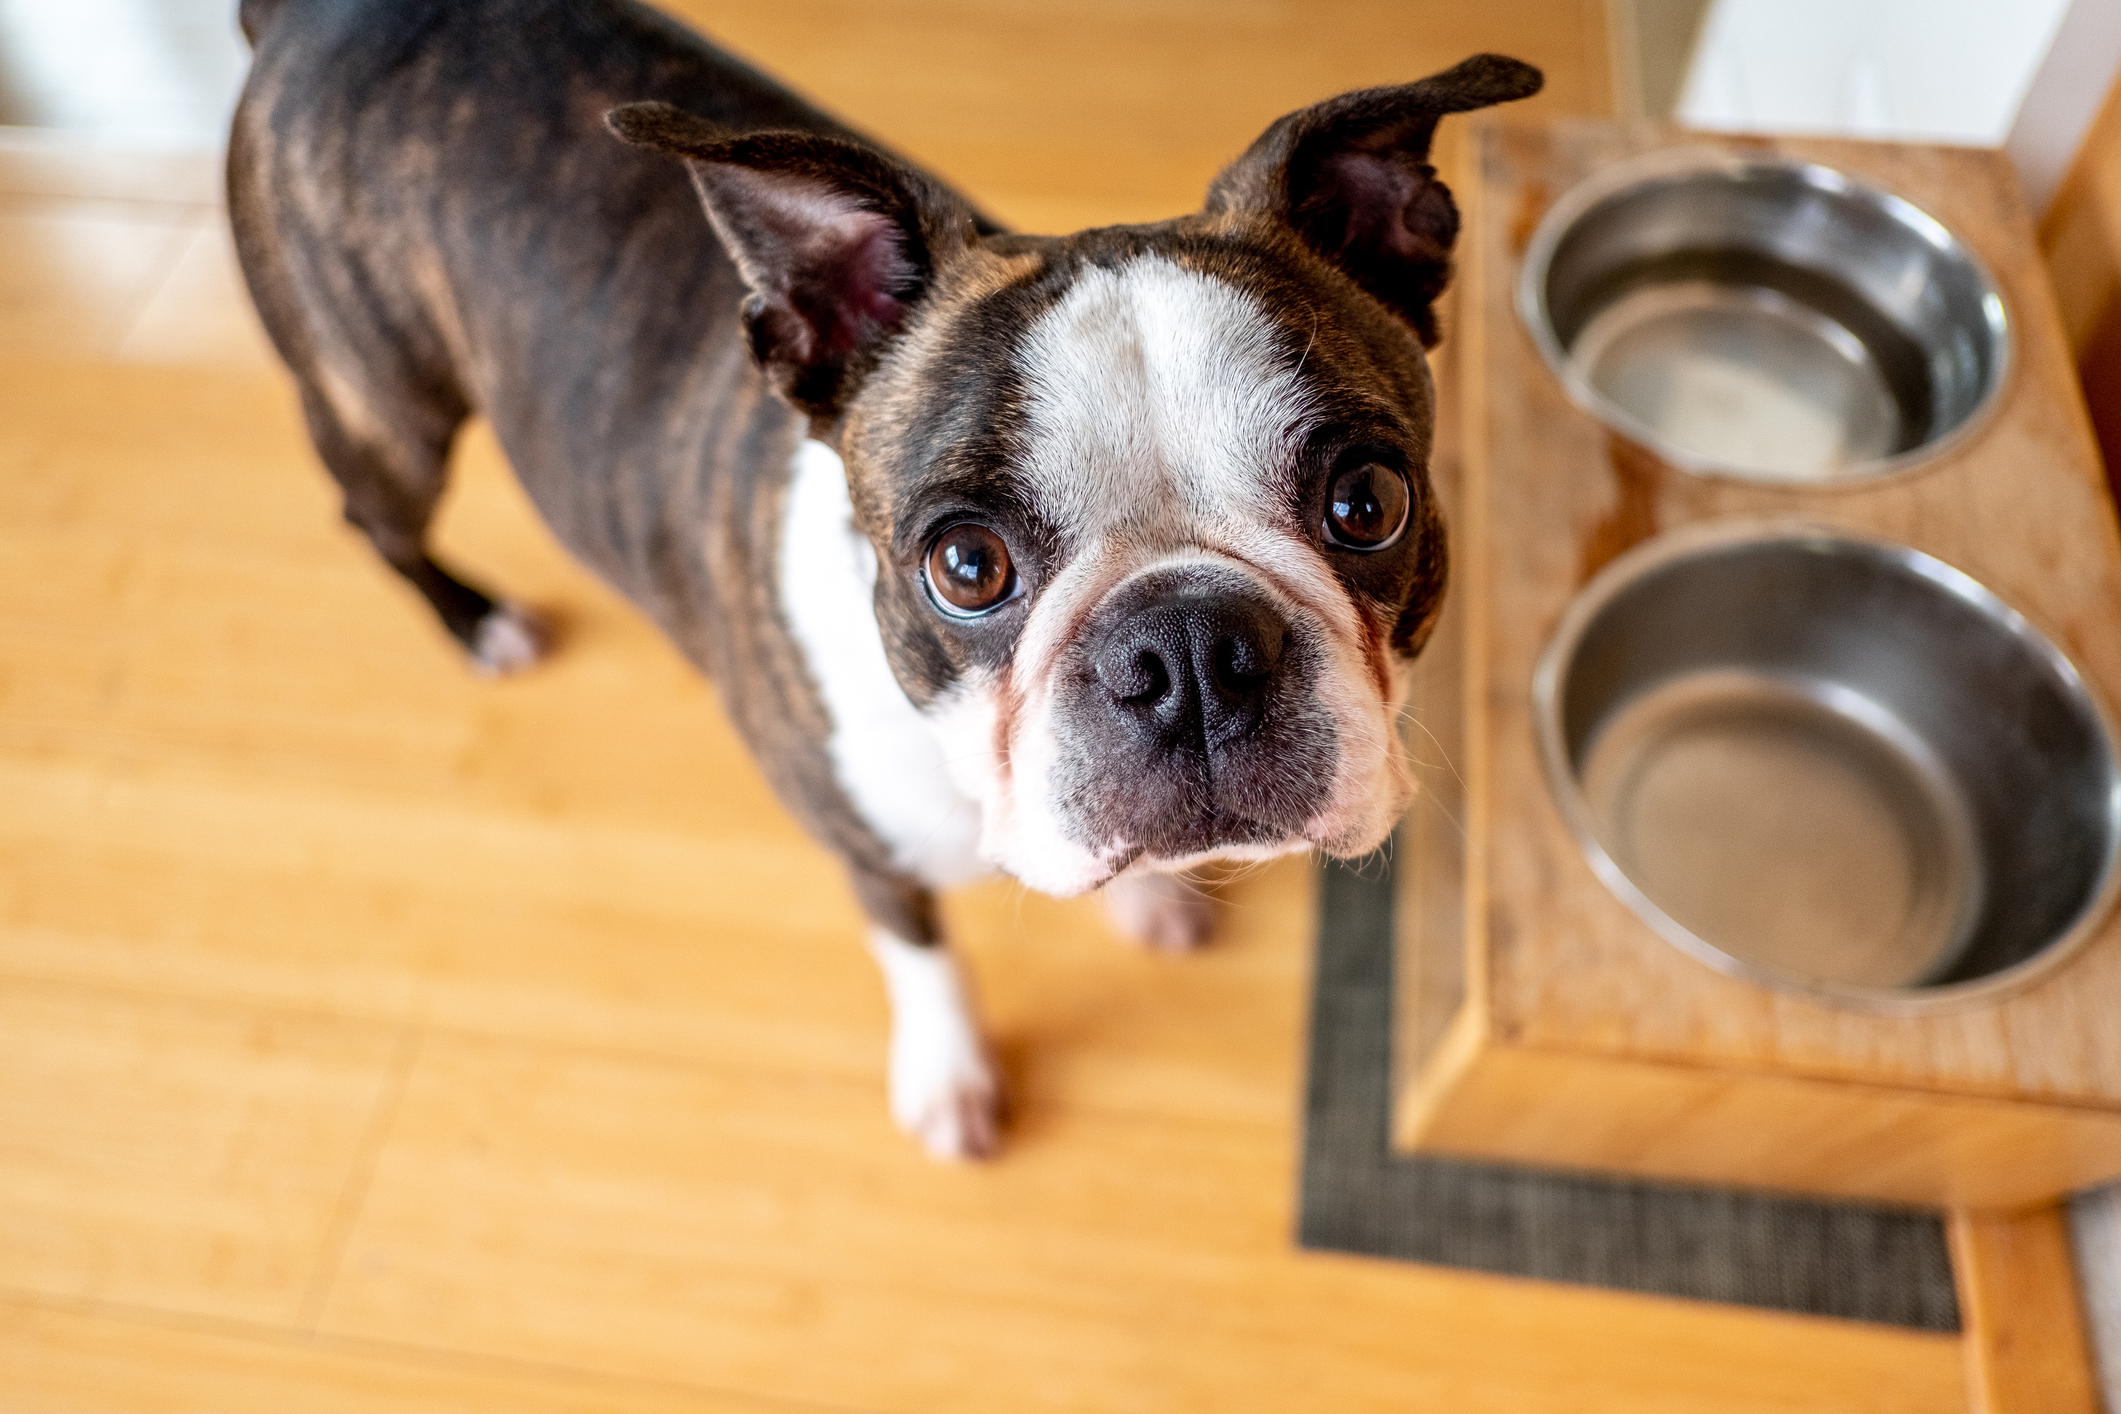 Brindle French Bulldog standing next to empty food bowl